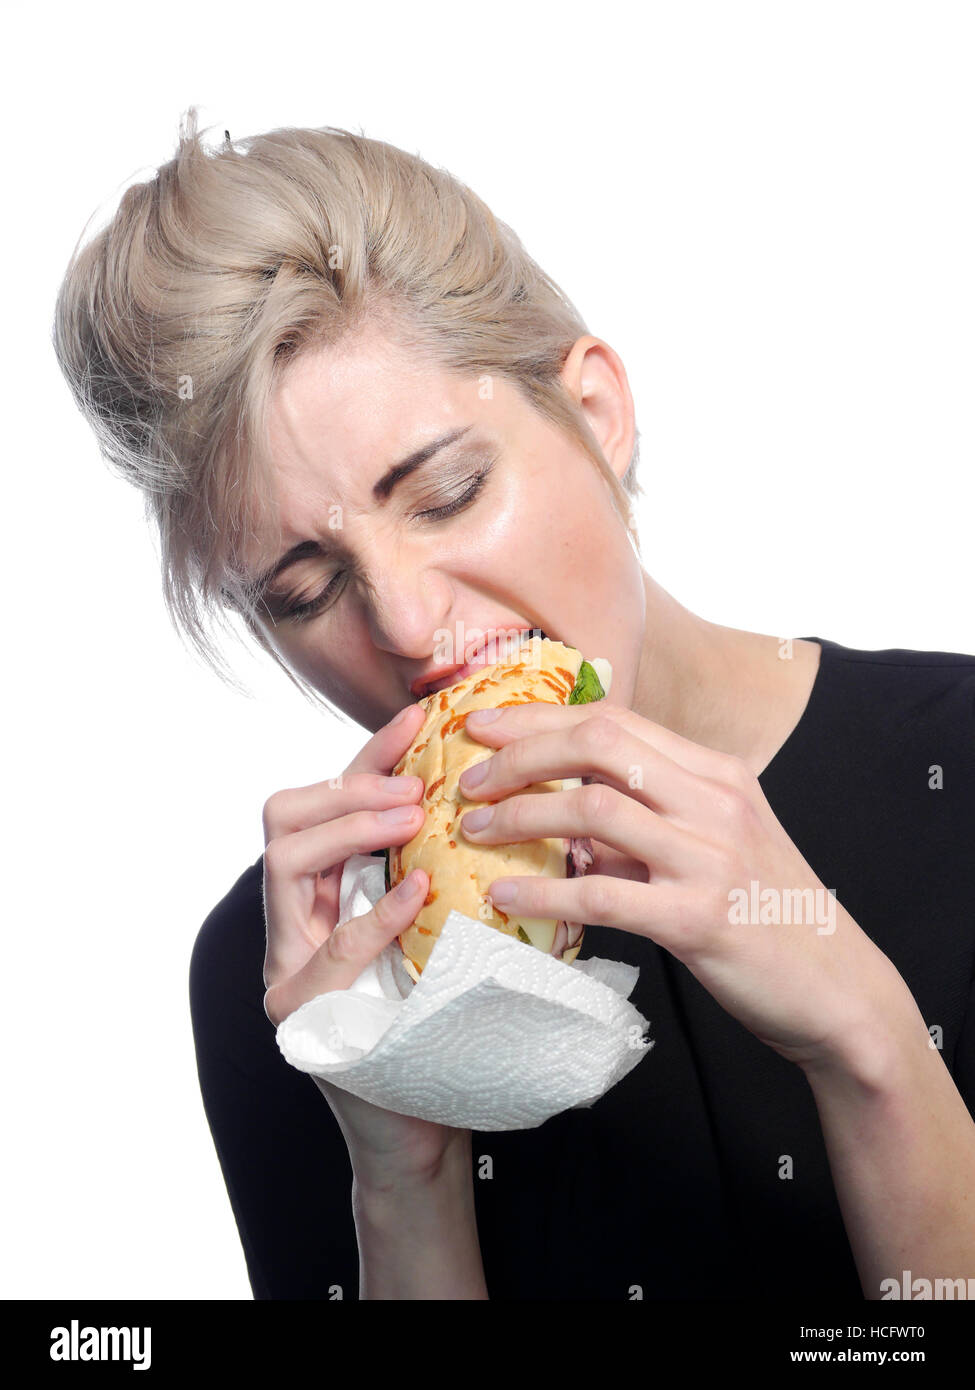 A image of a attractive woman eating a deli style sandwich. Stock Photo